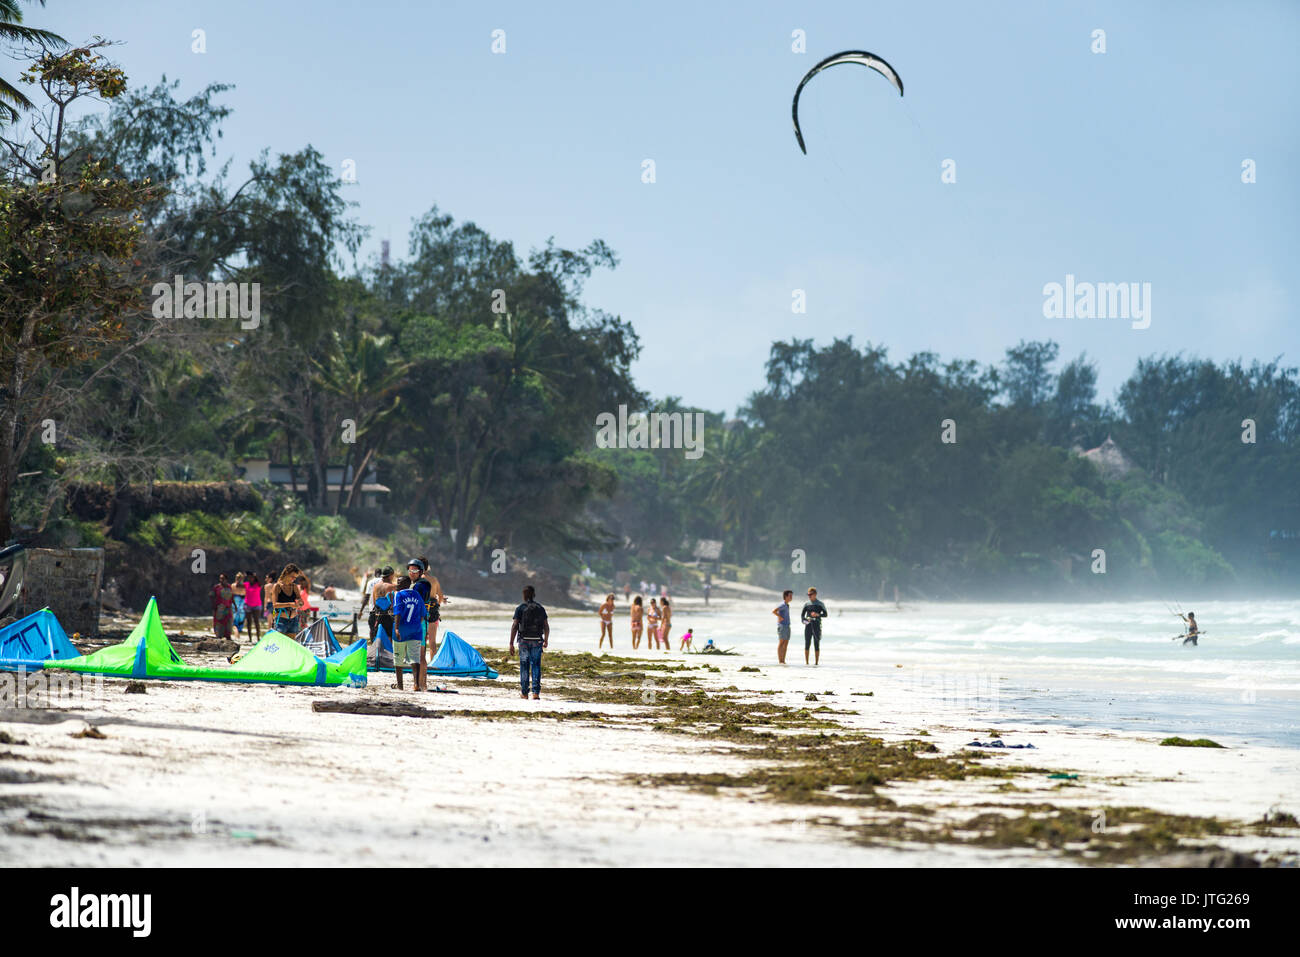 Tourists and locals on beach with kite surfer equipment, Diani, Kenya Stock Photo